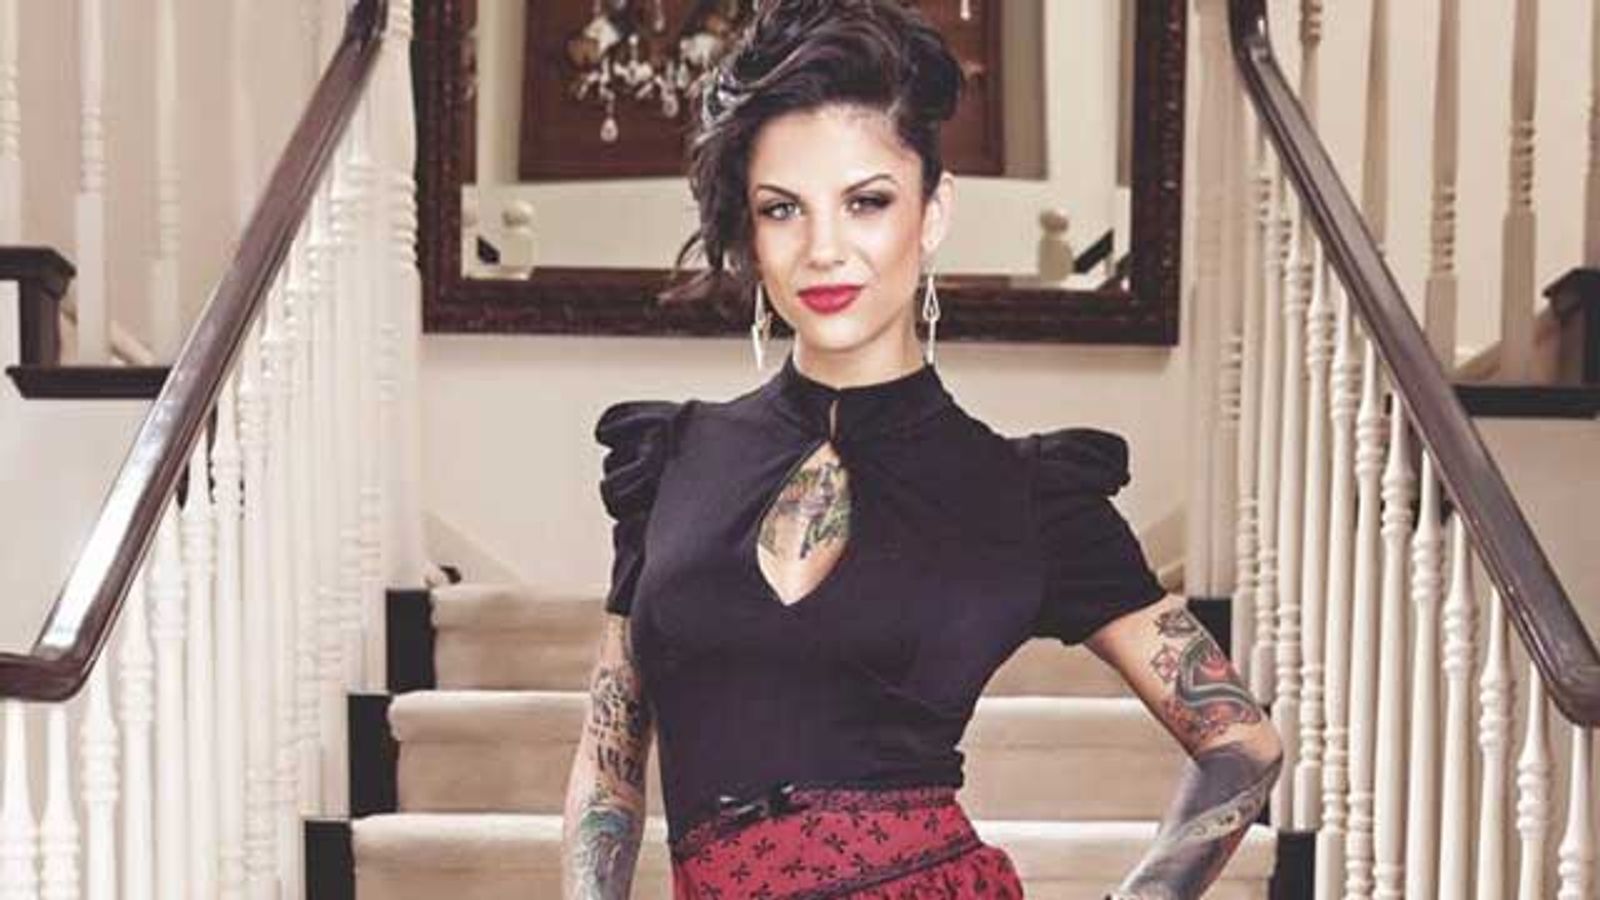 Bonnie Rotten Snags Best Female Performer Nom from NightMoves